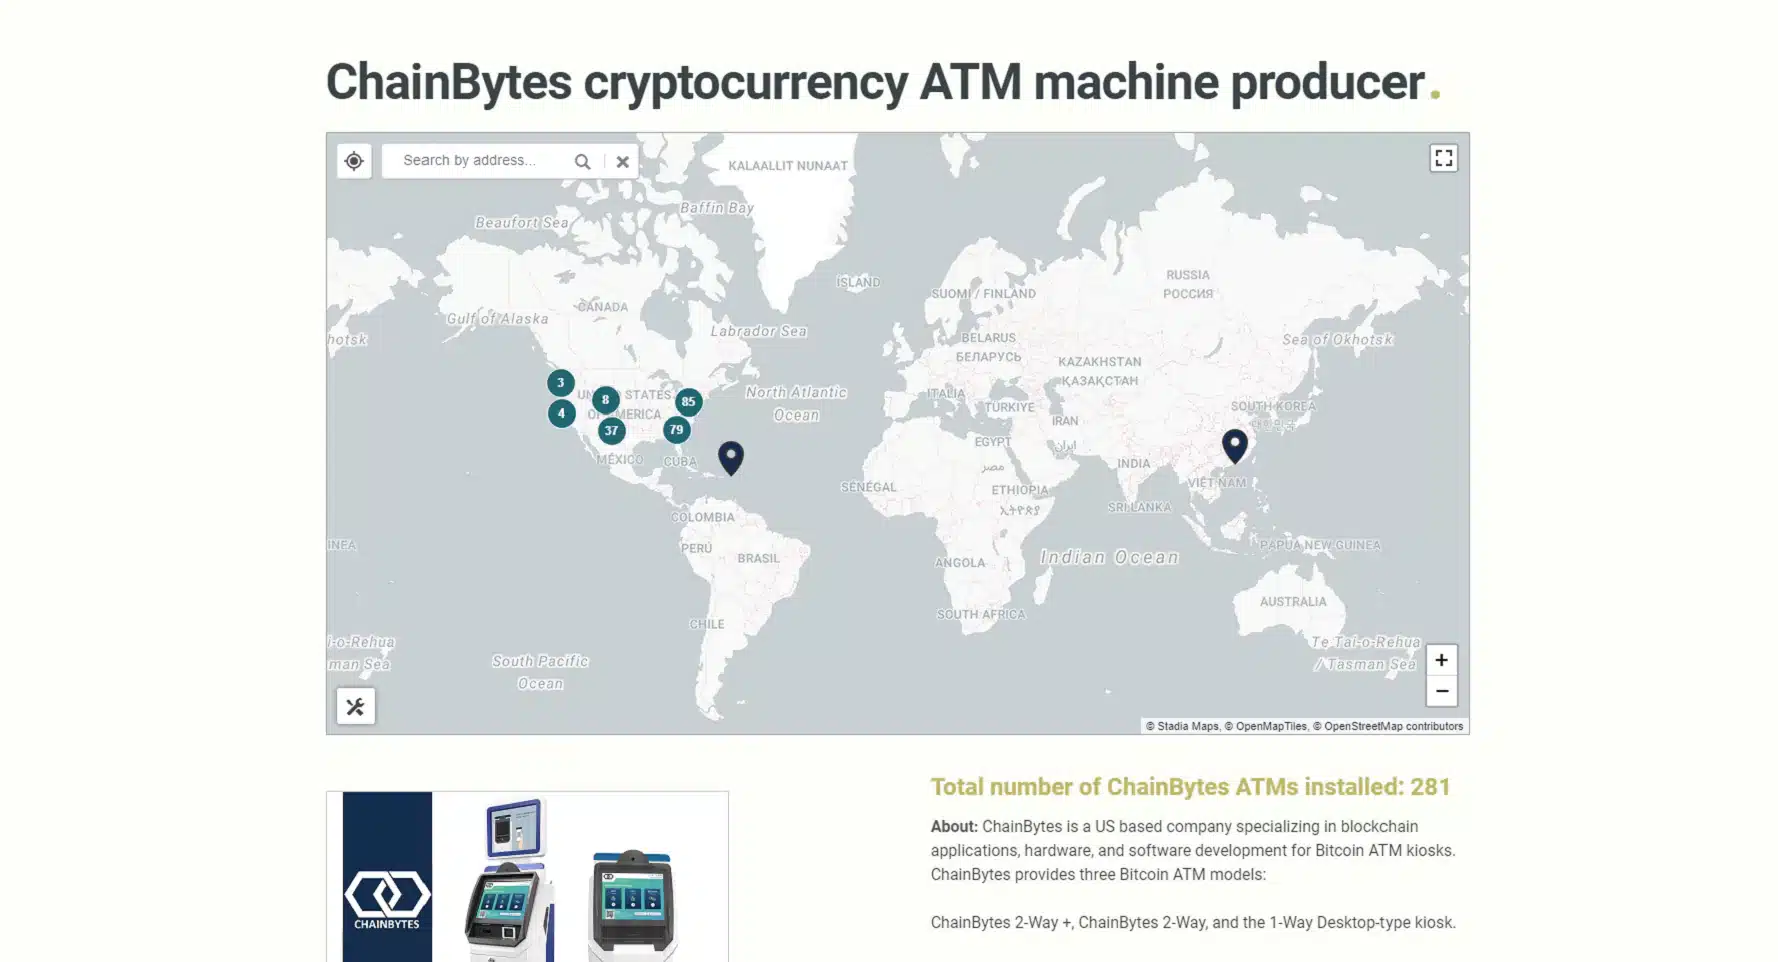 A Map showing locations with licensed ChainBytes BTMs in the US